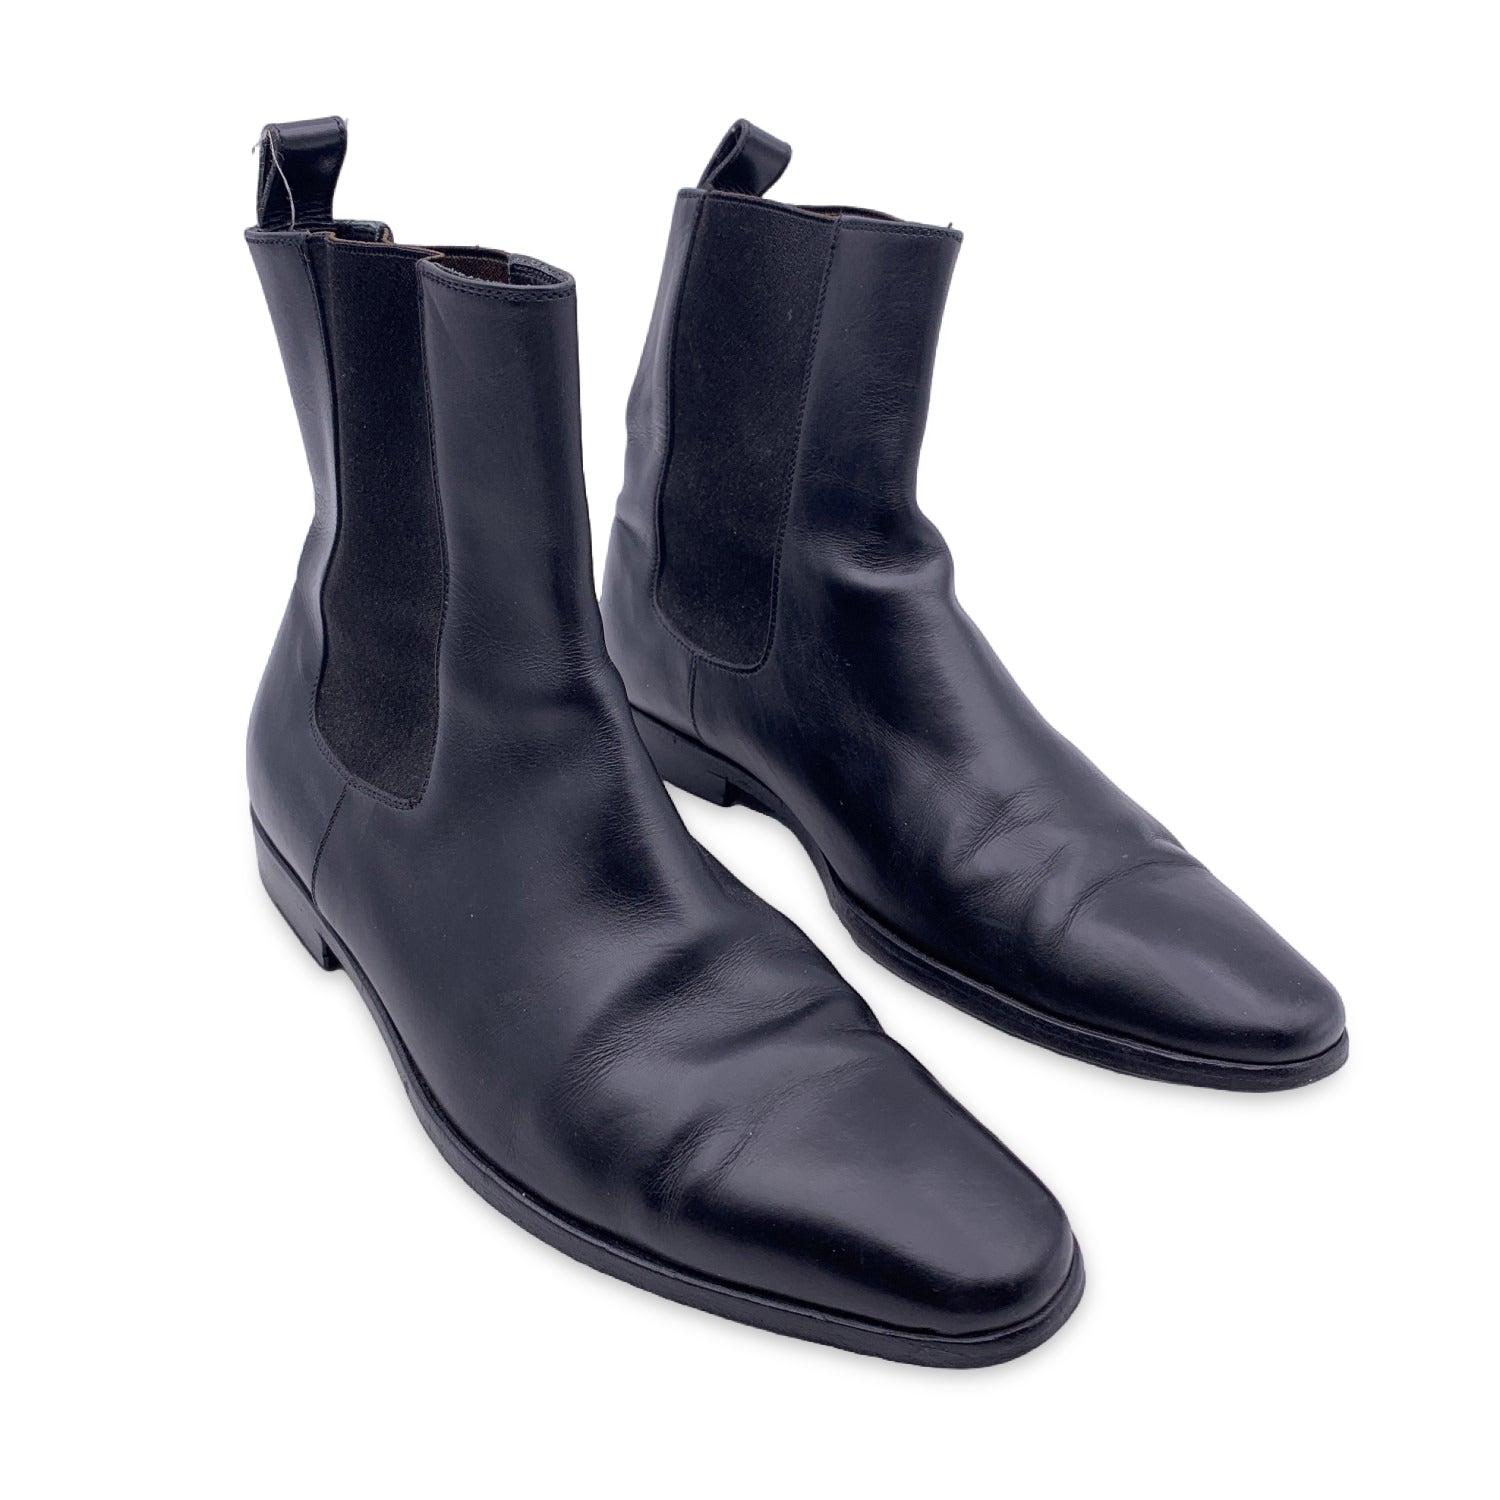 Black leather chealse boots by GUCCI designed with a pointed toe. Leather outsoles. Elastic leather strips for a flexible fit. Pull tab at ankleMade in Italy. Size: 40.5 (The size shown for this item is the size indicated by the designer on the